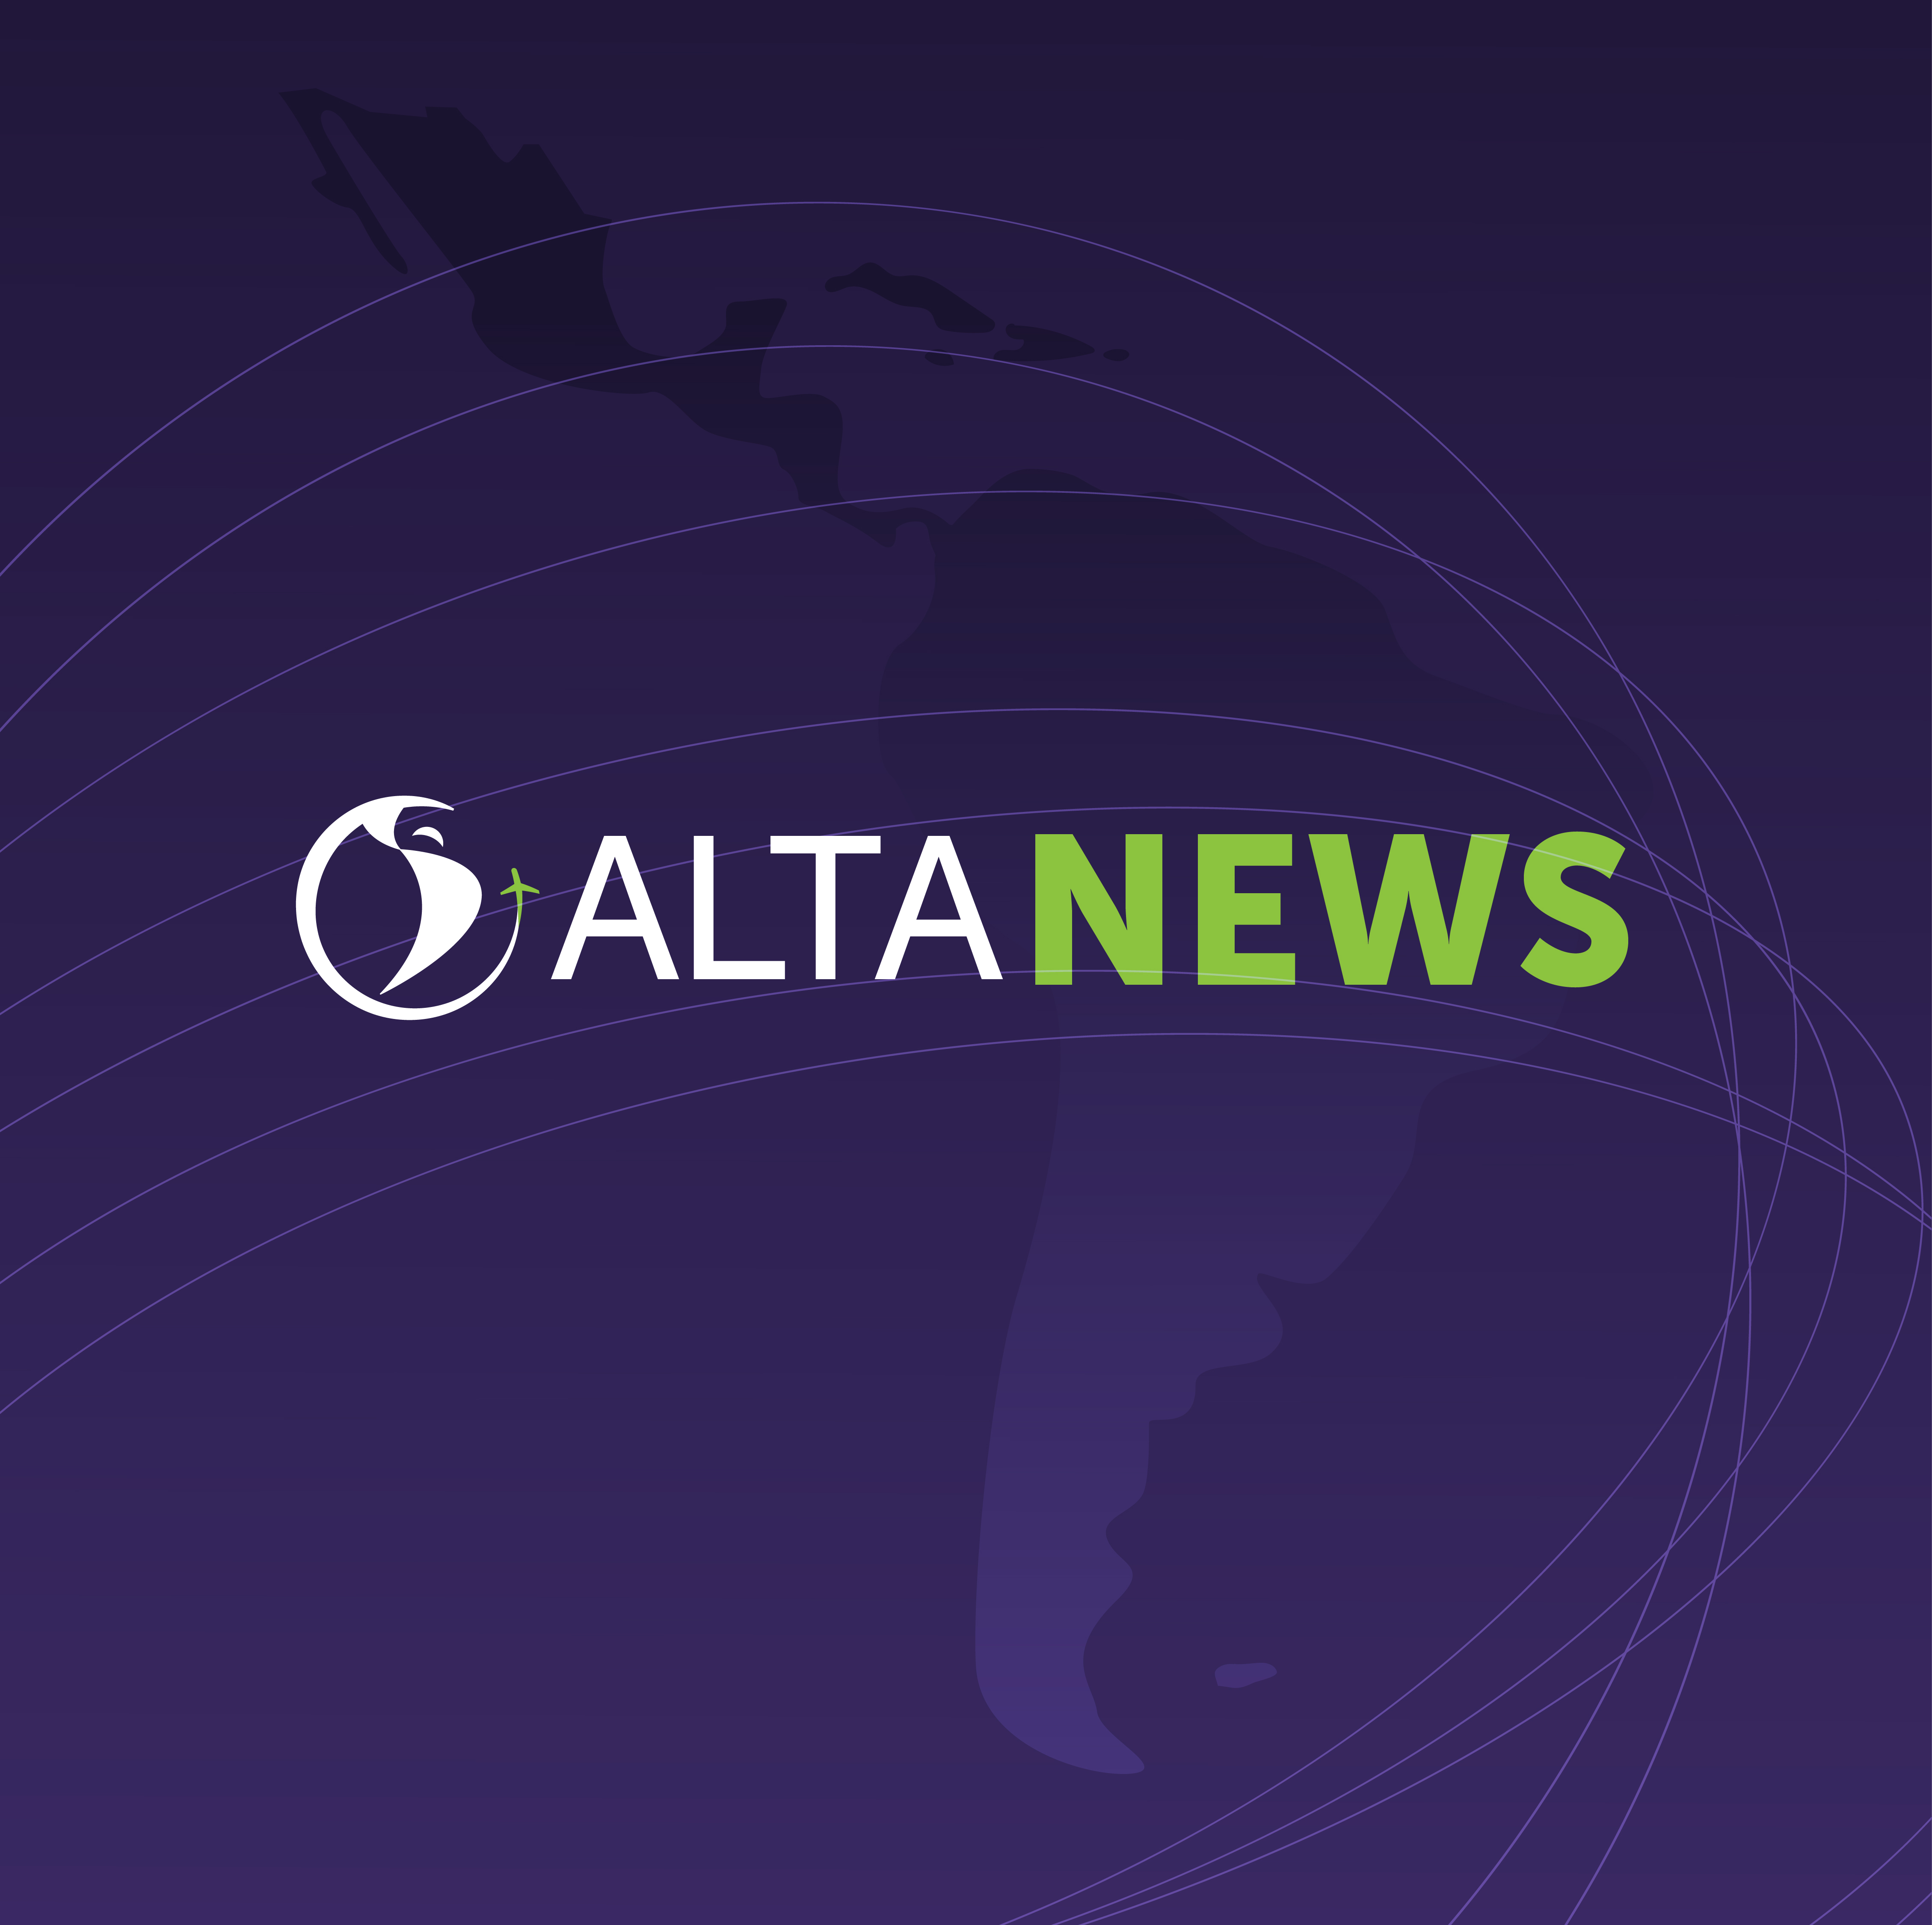 ALTA NEWS - Visa restrictions for crew members could harm Brazil's economy and society